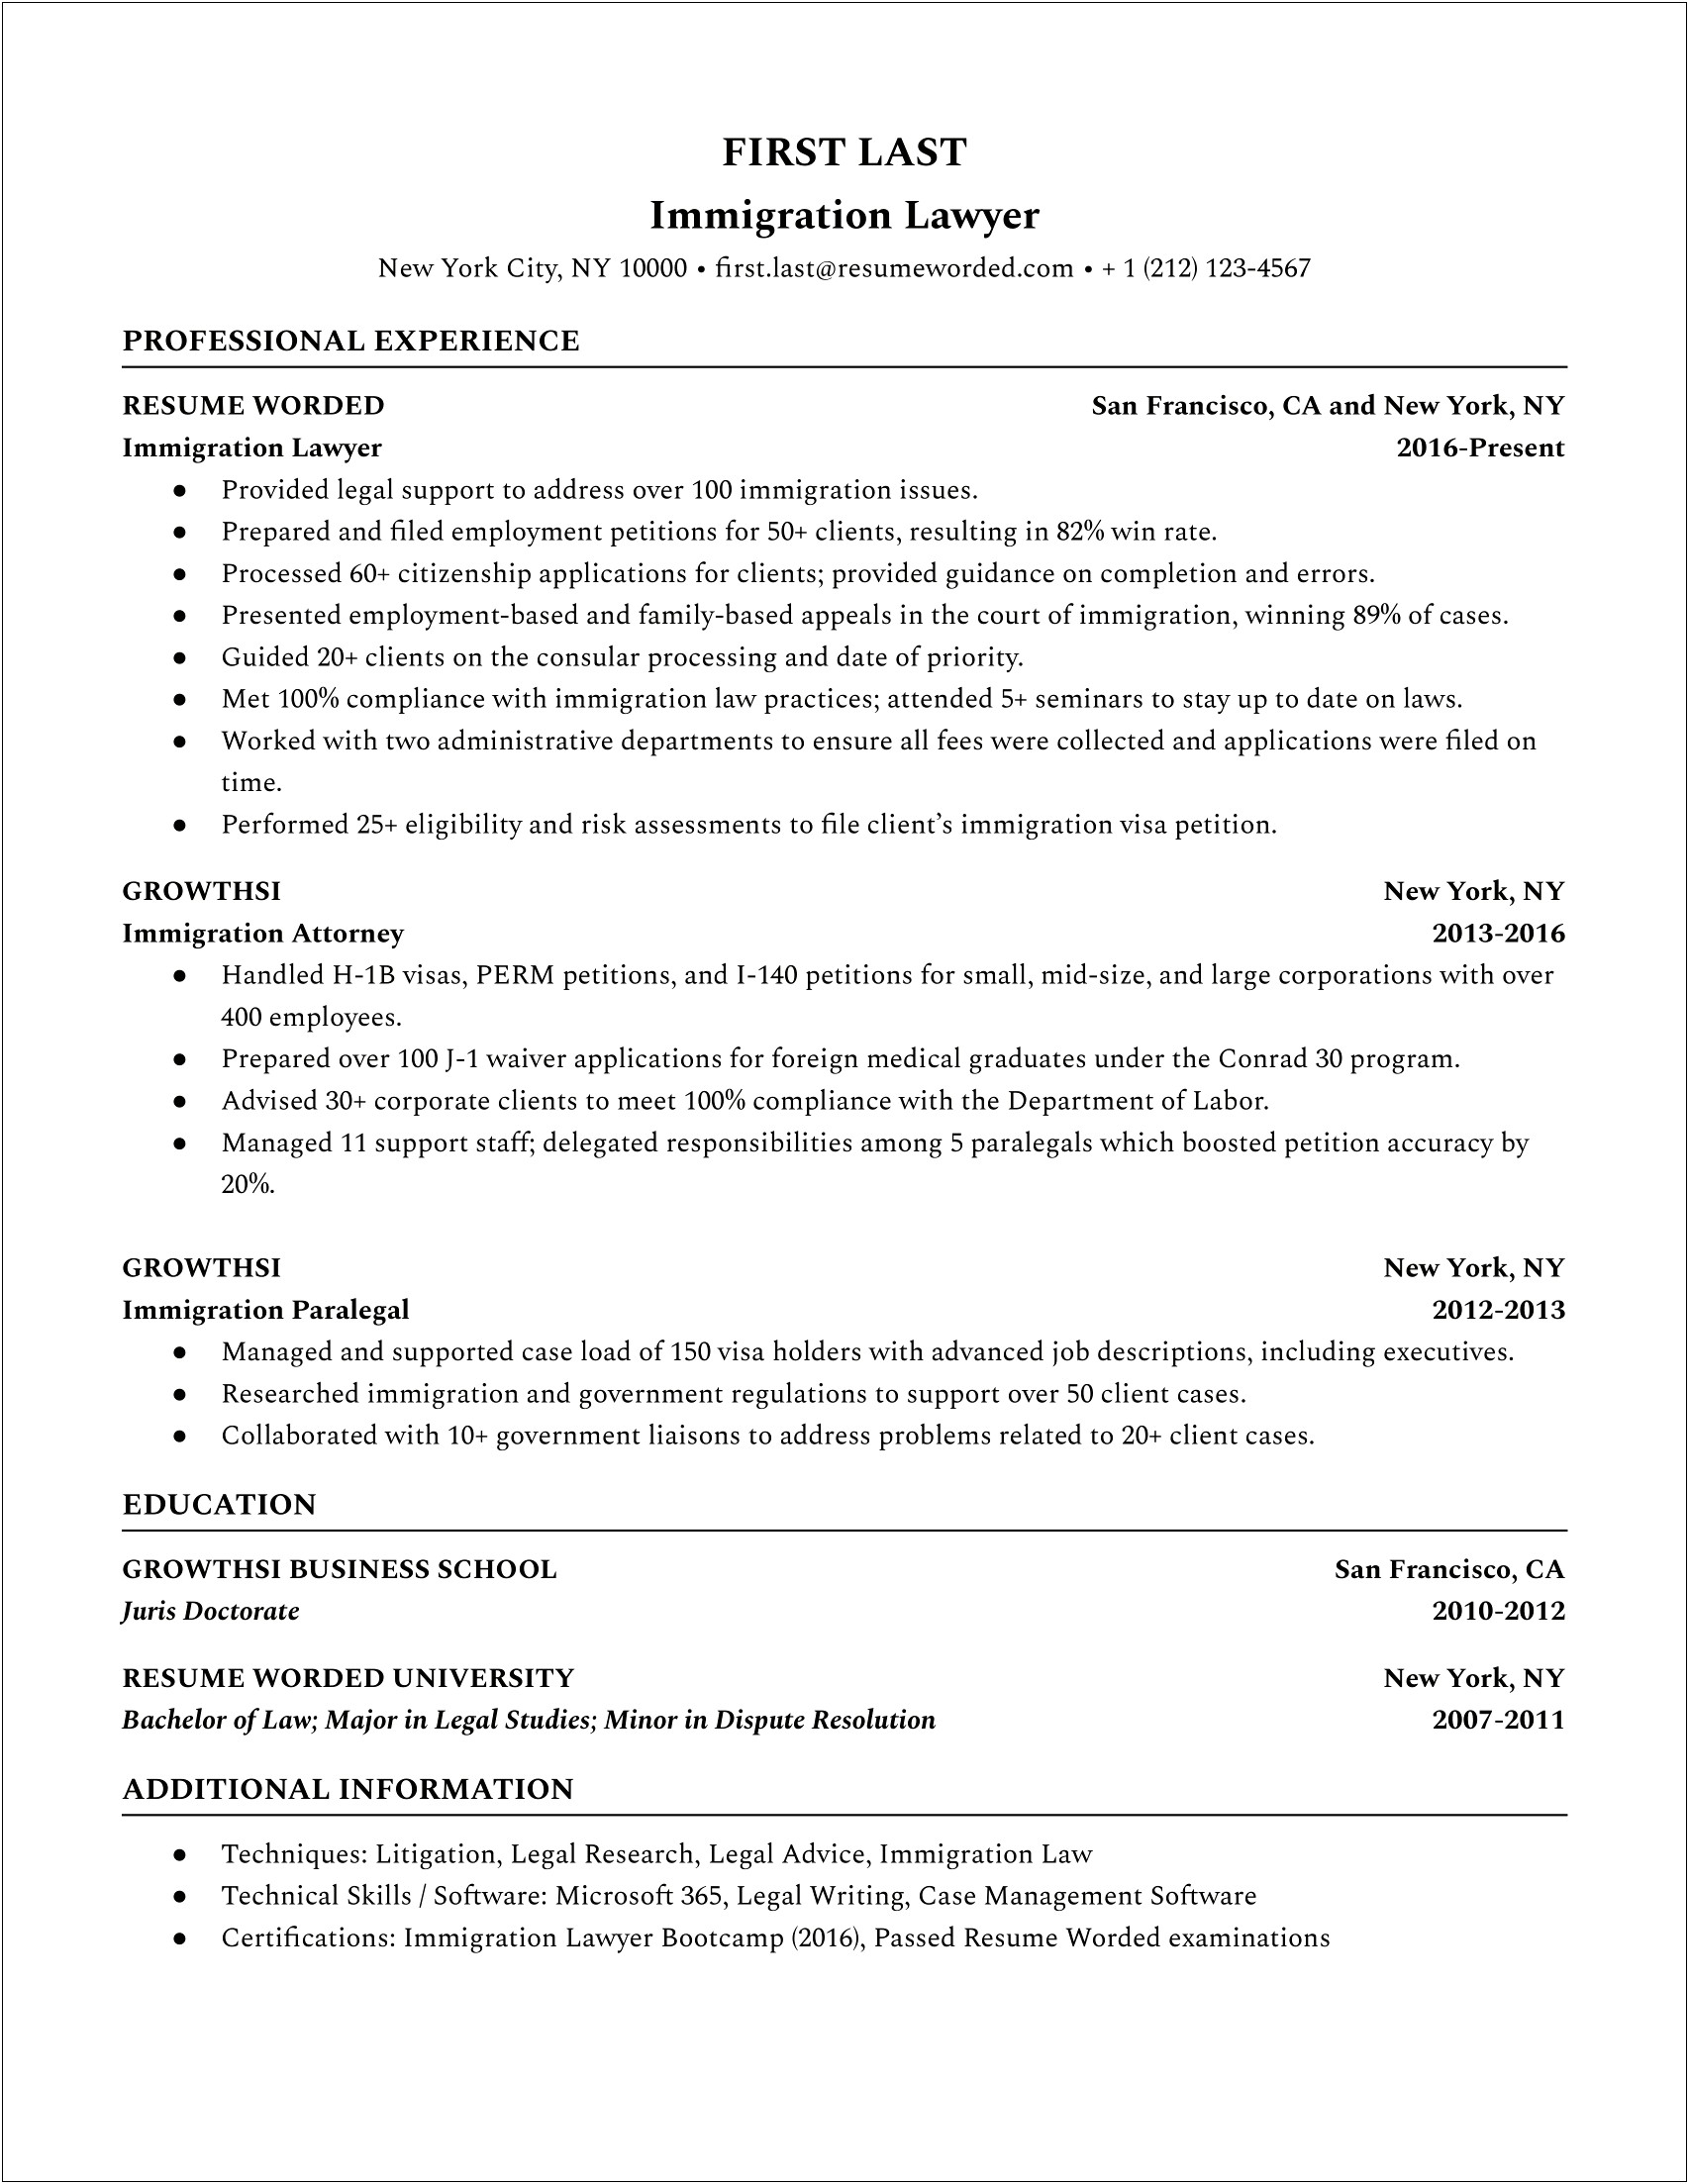 Commercial Real Estate Attorney Resume Sample